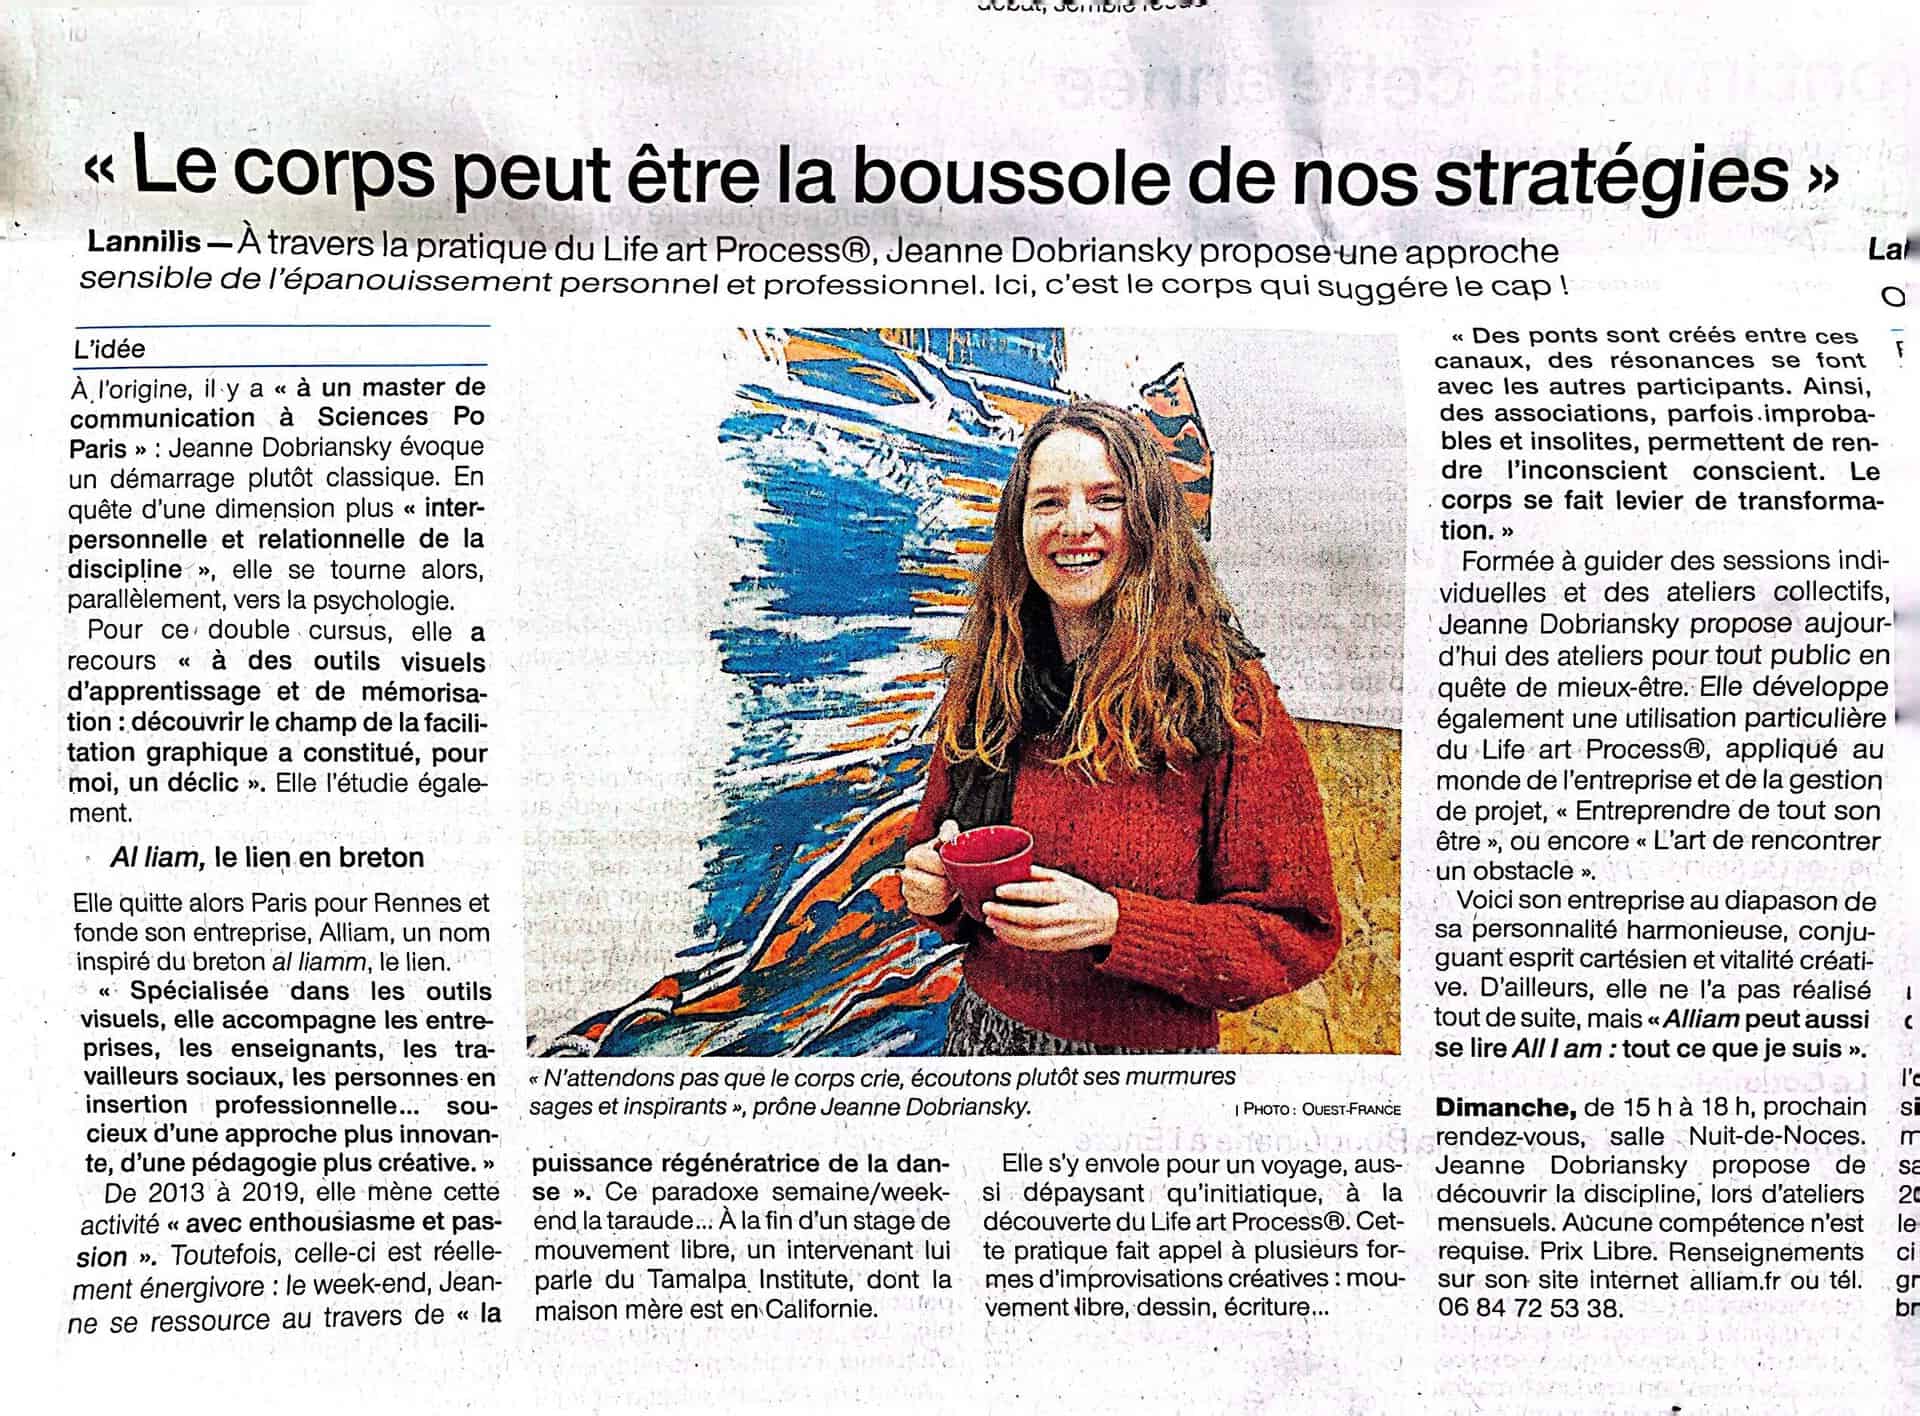 article alliam ouest france 26 mars